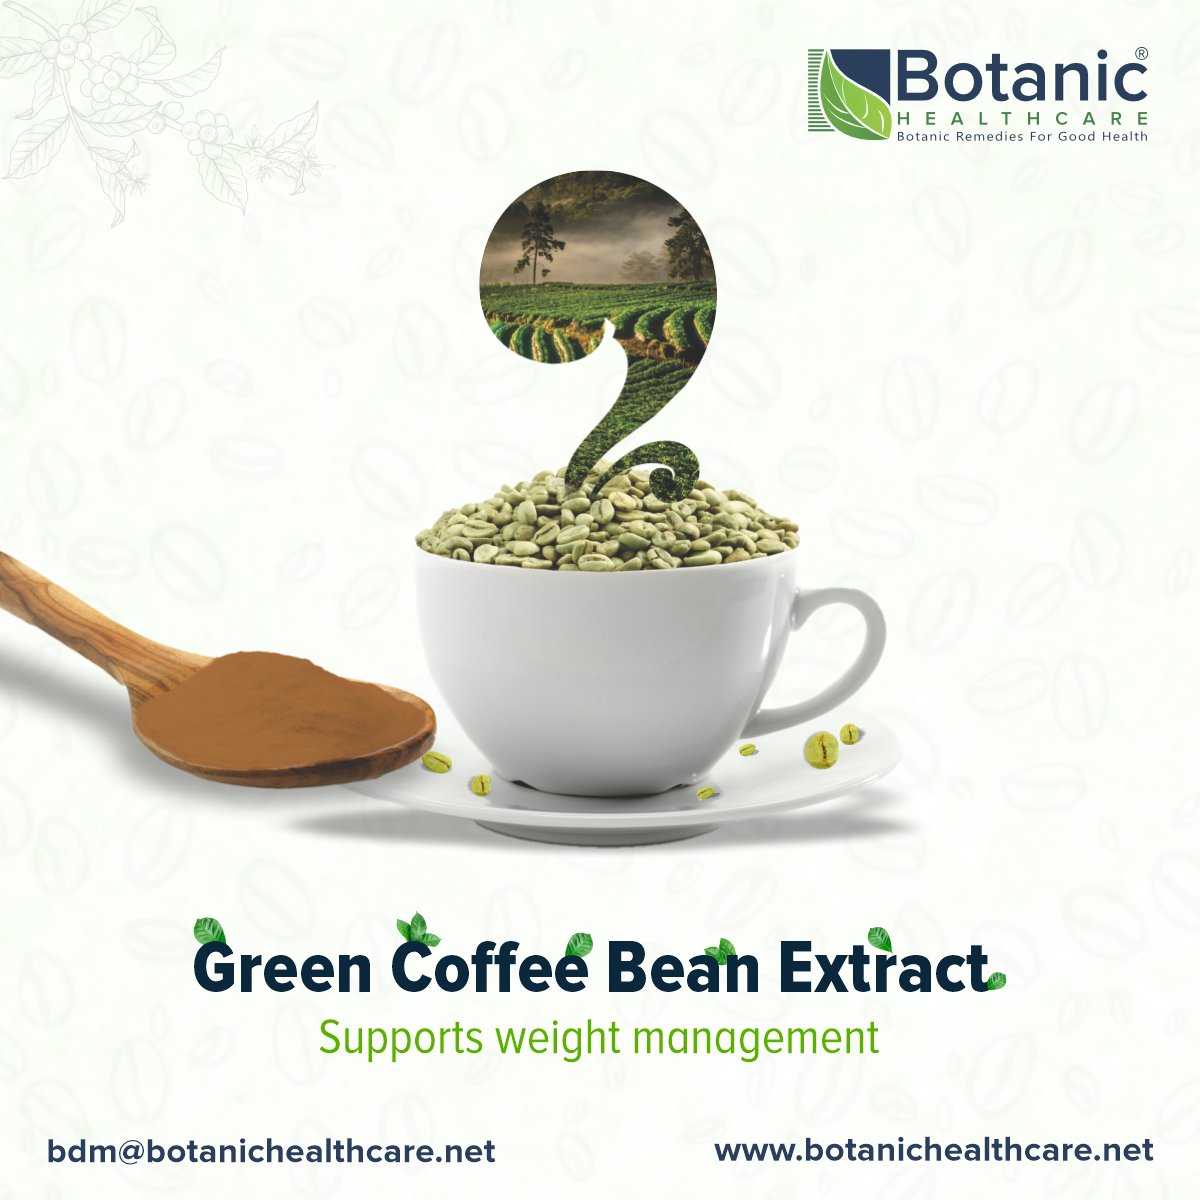 Our unique green coffee bean extract is packed with good stuff that is chlorogenic acid & trigonelline. It might even help you manage weight and keep your blood sugar happy. 

Write to us at bdm@botanichealthcare.net for more information.
#Botanichealthcare #herbalextracts